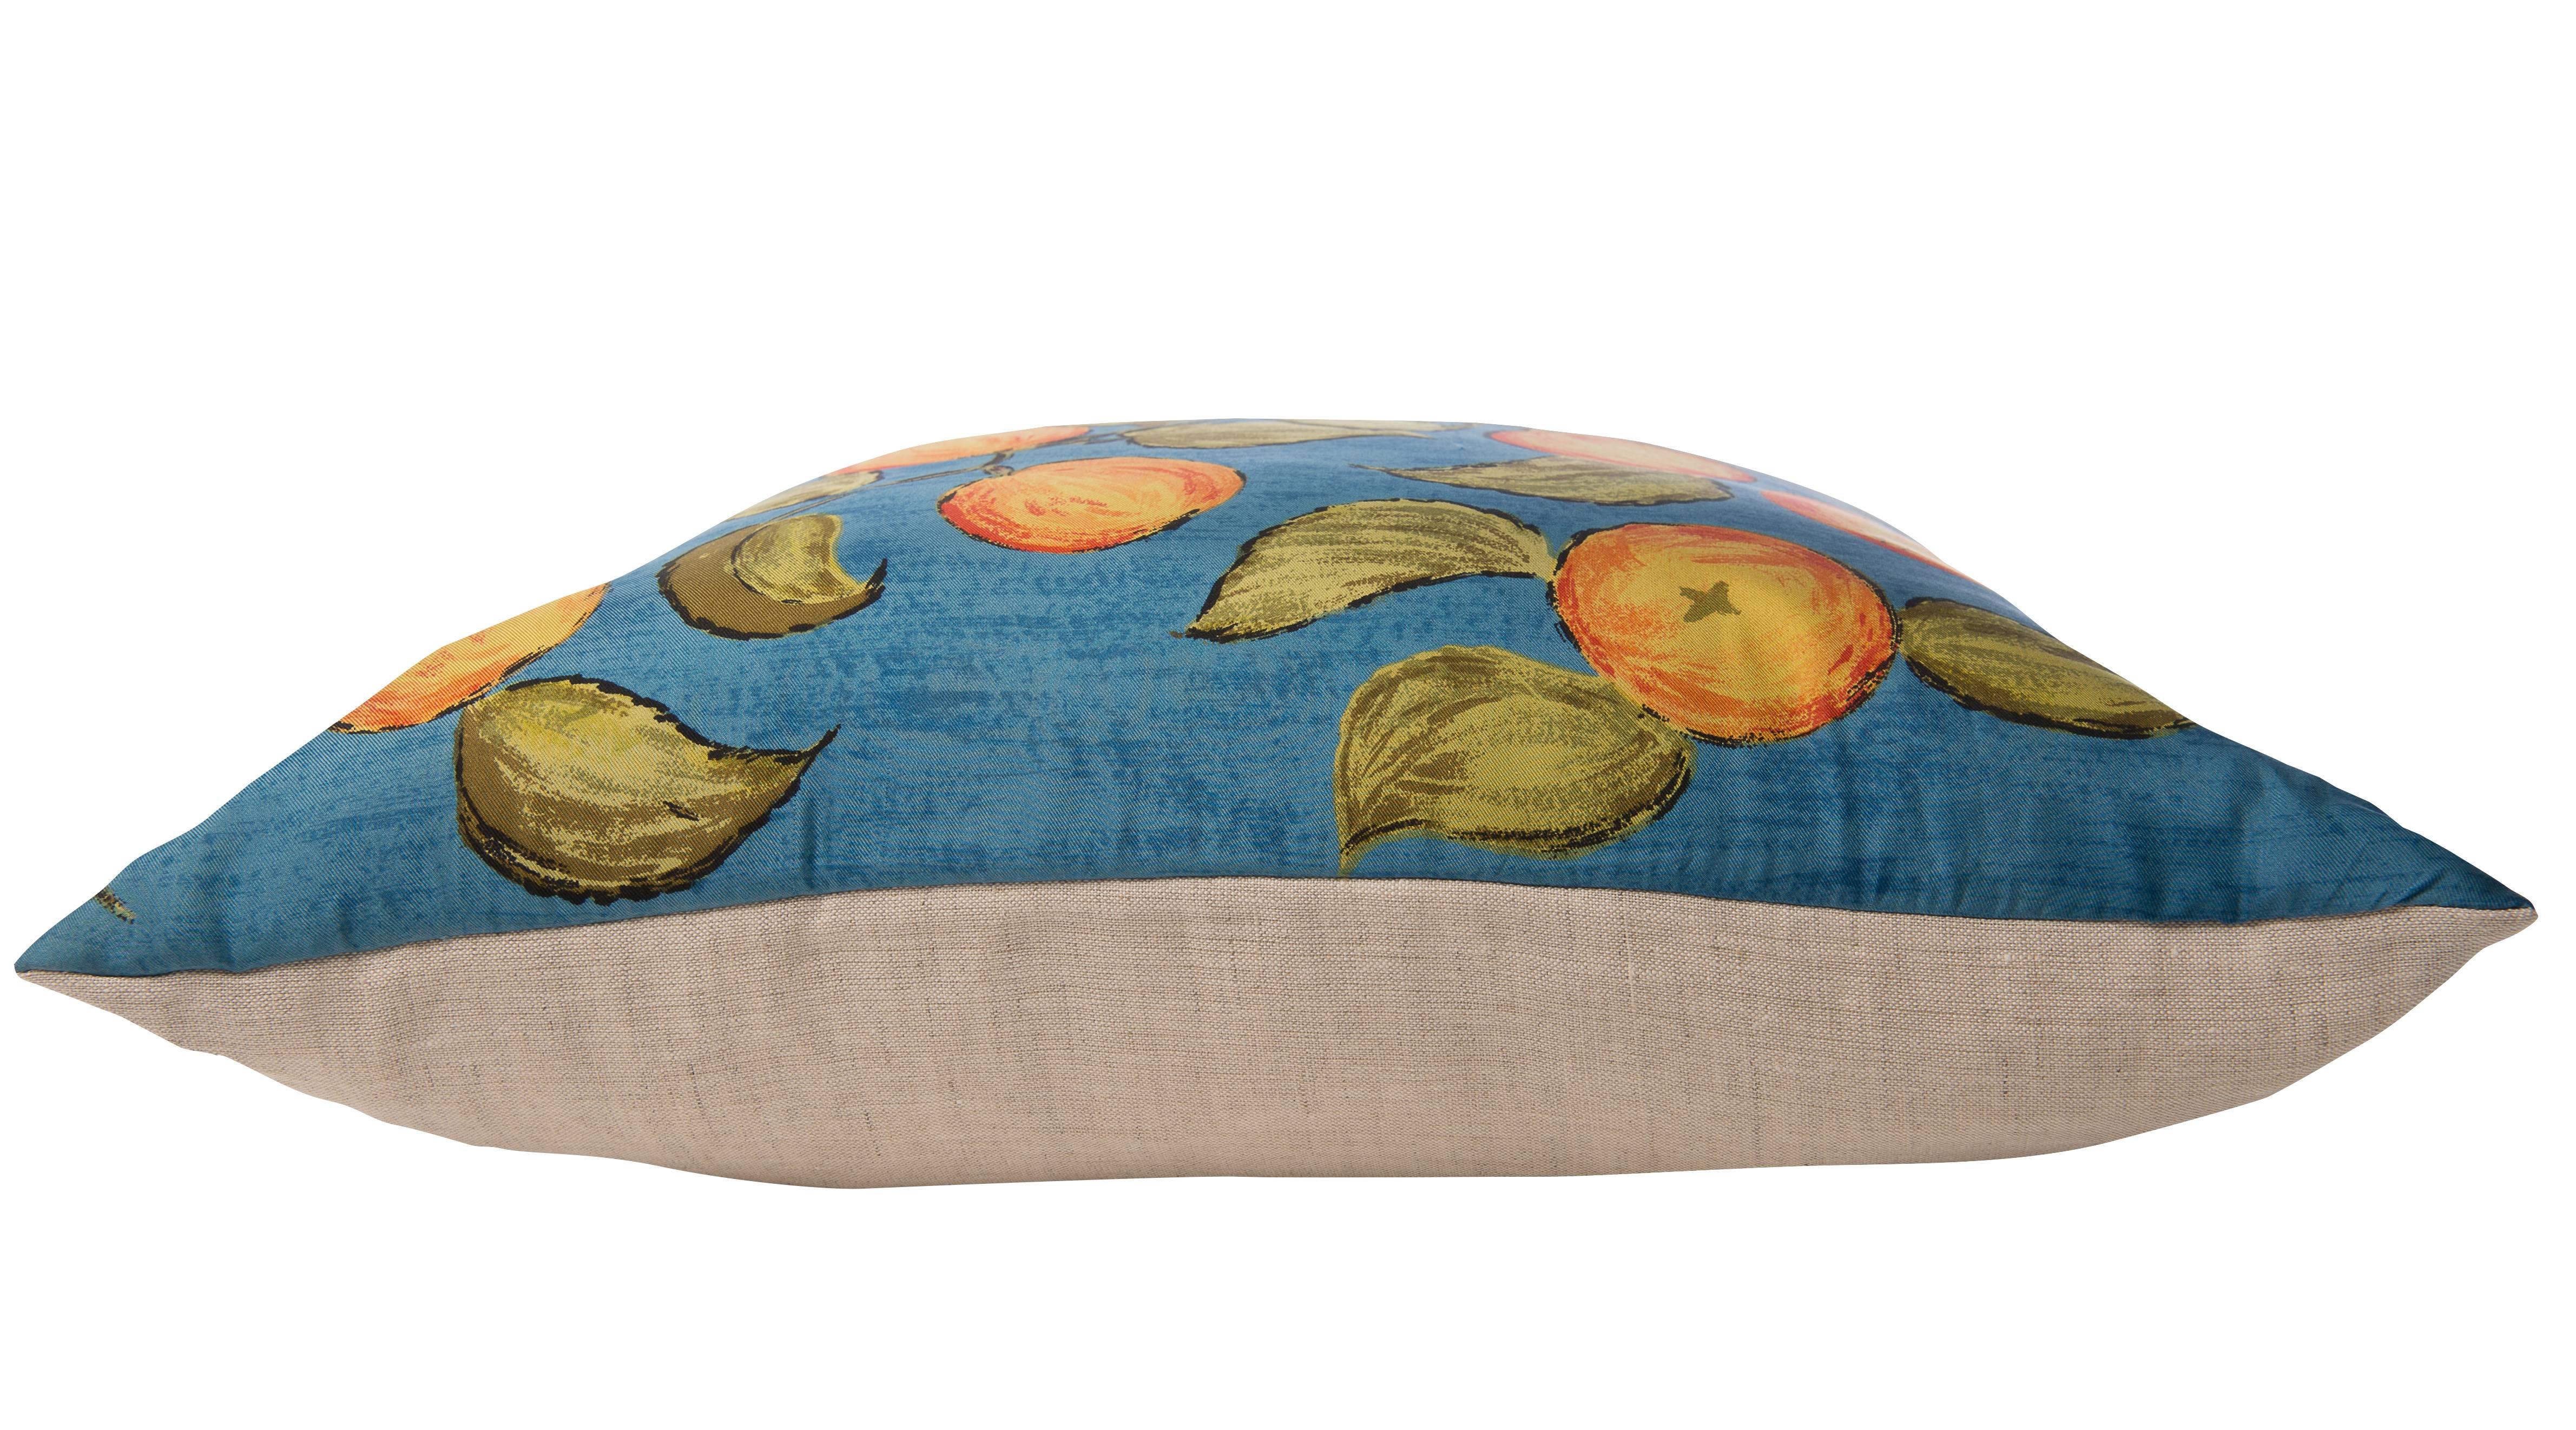 This cushion is a one-of-a-kind and part of a sustainability project.
It has been created from an up-cycled, recycled luxury fabric, used with the intentions of promoting a more eco-friendly environment by using already existing materials. We both